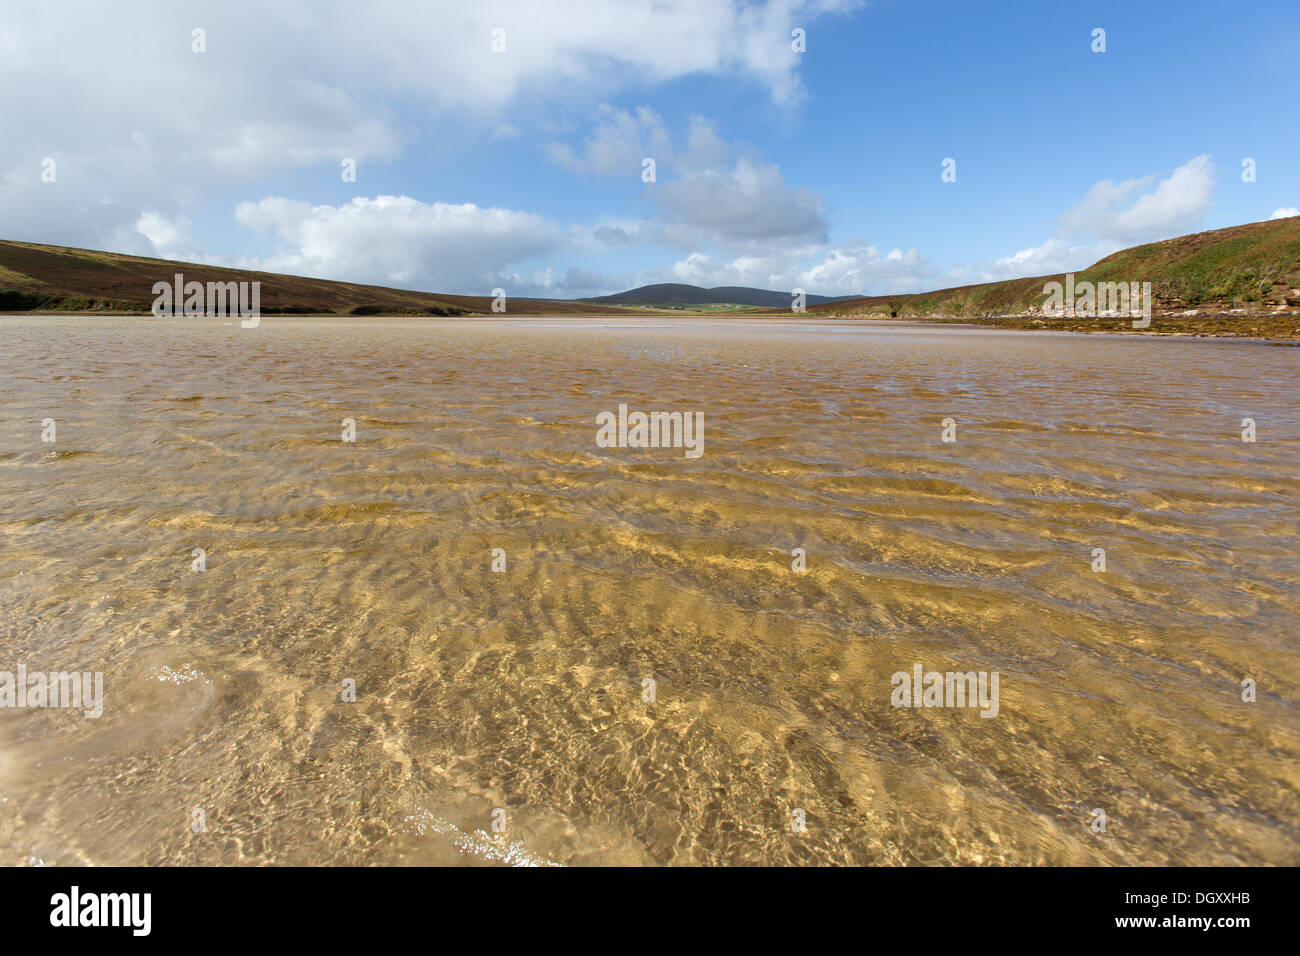 Islands of Orkney, Scotland. Picturesque view of Waulkmill Bay on the south west coast of Orkney’s Mainland. Stock Photo